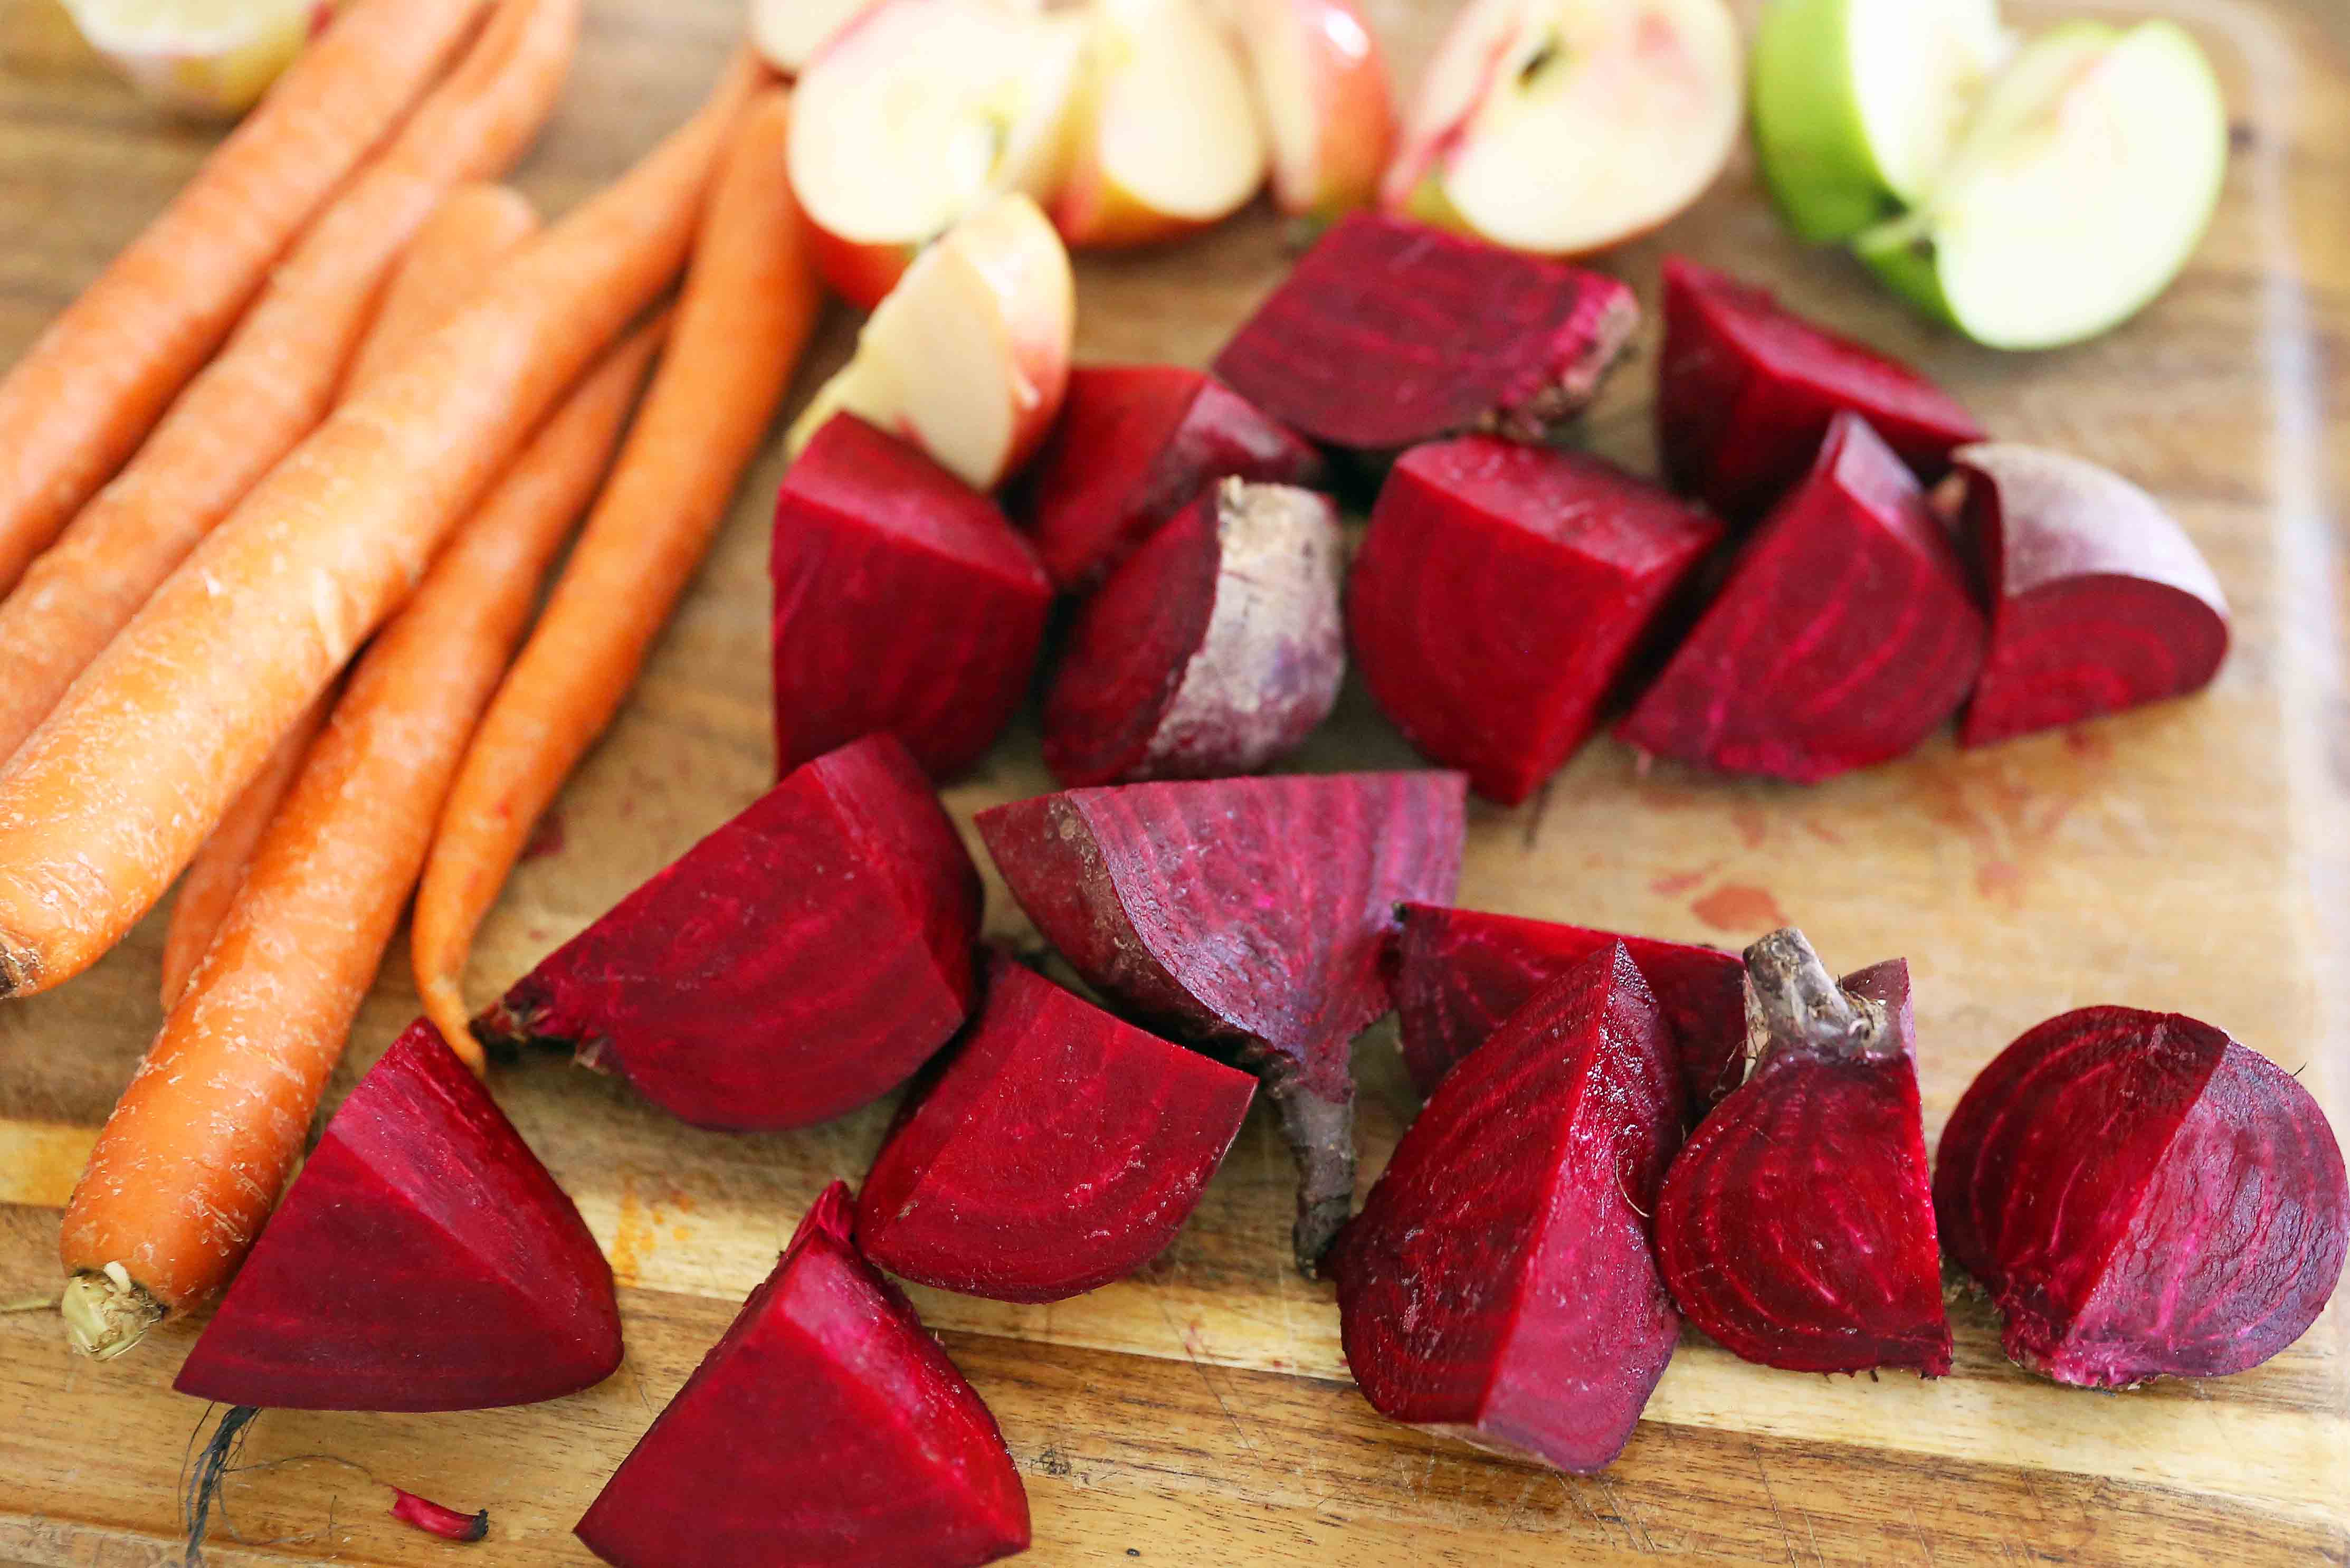 Beets, Carrots, Apples for Juicing. Healthy Juice Cleanse Recipes. Four health fresh fruit and vegetable juice recipes. How to make fresh juices at home for a fraction of the price. Find out the immune boosting and health benefits from juicing. www.modernhoney.com #juicing #juices #fruitandvegetablejuices #juicingrecipes